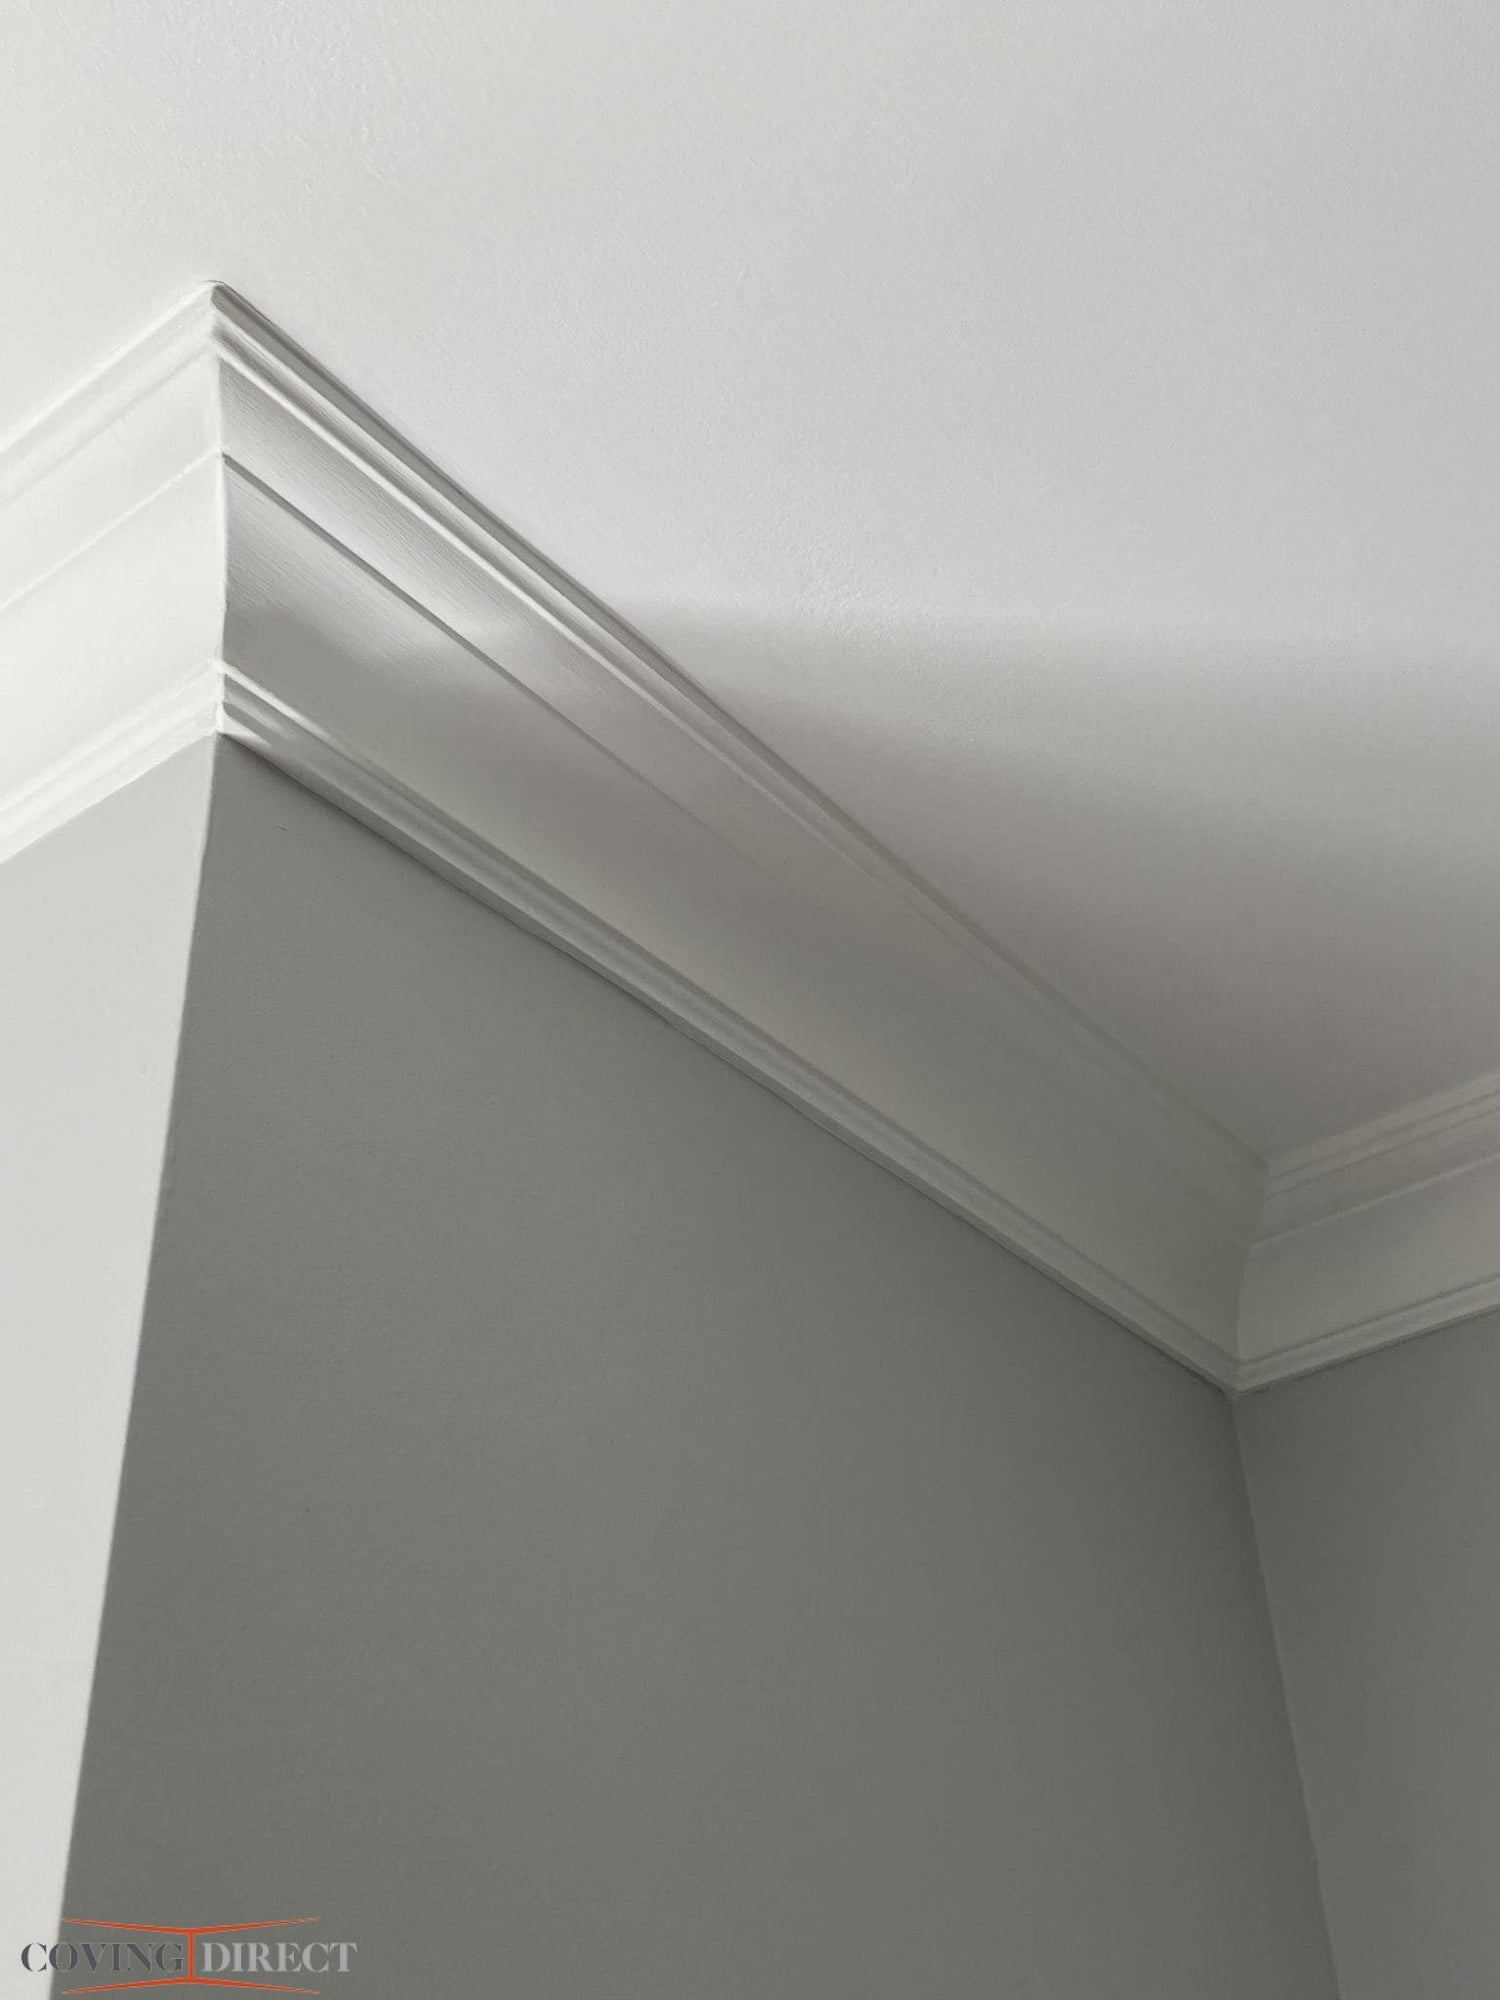 MD367 - Lightweight Coving above a grey painted wall